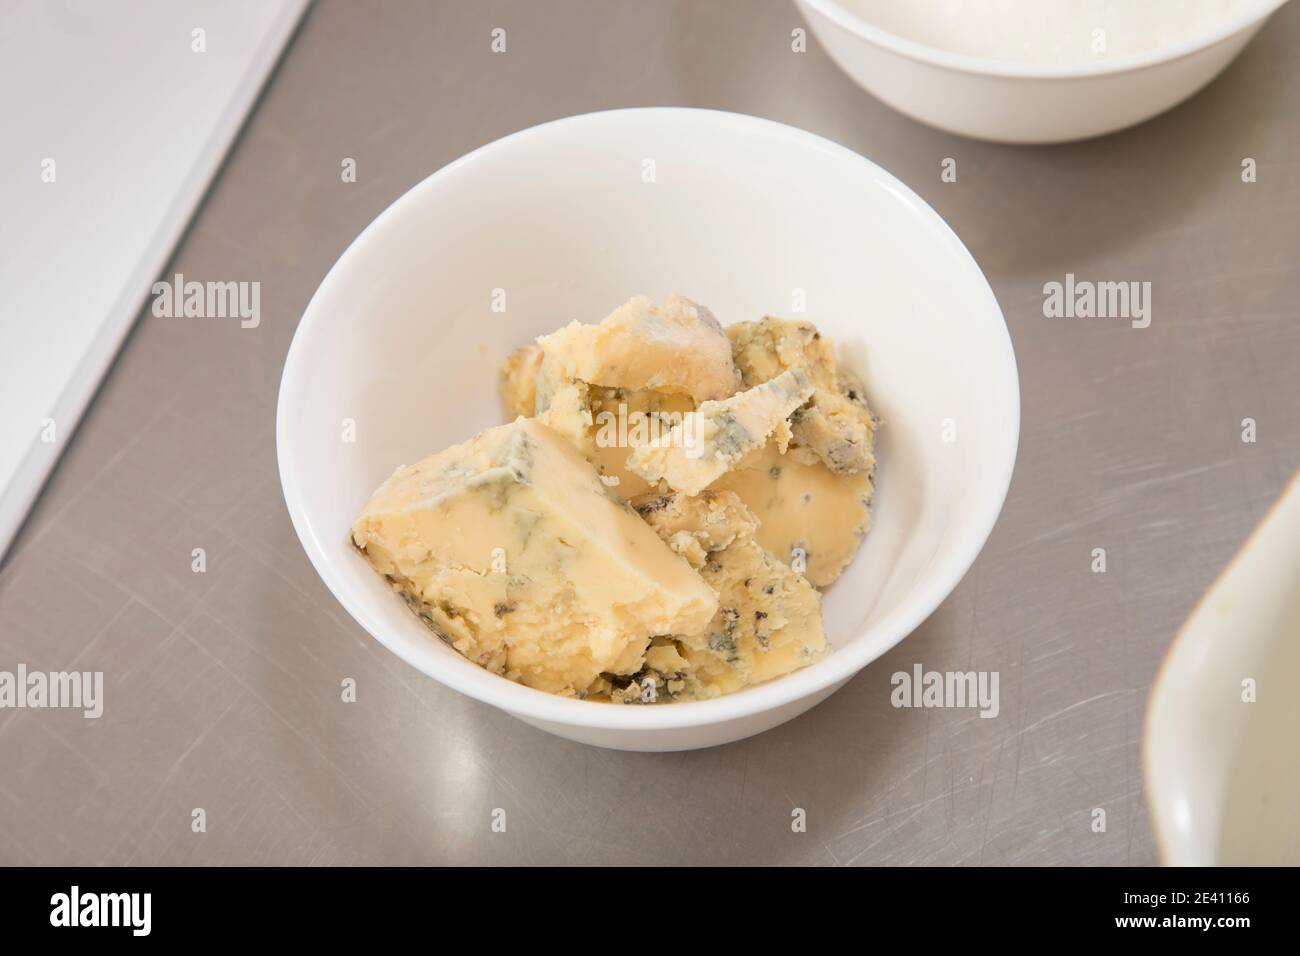 Delicious blue cheese in a white ceramic bowl. It is located on a metal surface. Close-up. Stock Photo